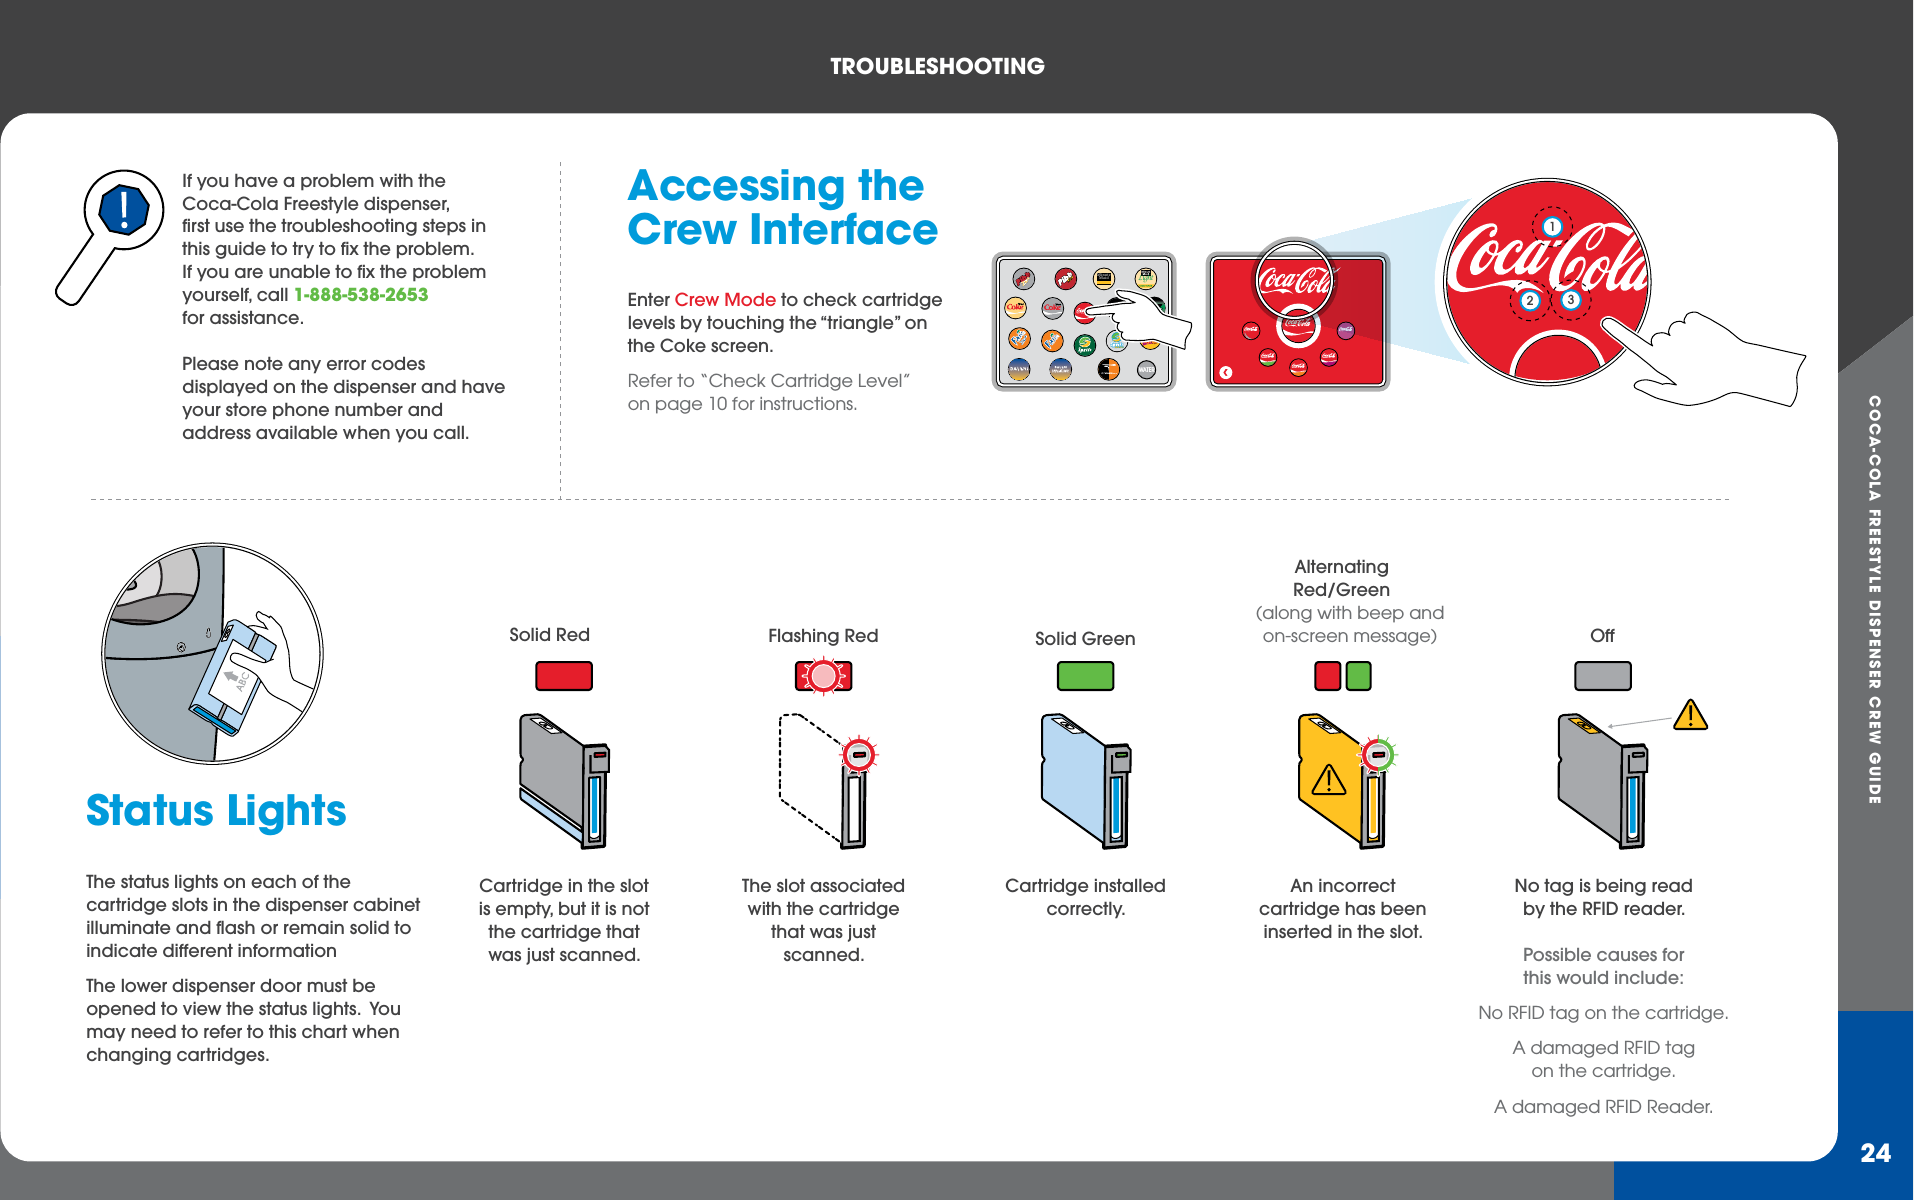 COCA-COLA FREESTYLE DISPENSER CREW GUIDETROUBLEShOOTING24If you have a problem with the Coca-Cola Freestyle dispenser, first use the troubleshooting steps in this guide to try to fix the problem.If you are unable to fix the problem yourself, call 1-888-538-2653 for assistance.Please note any error codes displayed on the dispenser and have your store phone number and address available when you call.Status LightsThe status lights on each of the cartridge slots in the dispenser cabinet illuminate and flash or remain solid to indicate different informationThe lower dispenser door must be opened to view the status lights.  You may need to refer to this chart when changing cartridges.Accessing the Crew InterfaceEnter Crew Mode to check cartridge levels by touching the “triangle” on the Coke screen. Refer to “Check Cartridge Level” on page 10 for instructions.Cartridge in the slot is empty, but it is not the cartridge that was just scanned.Solid RedThe slot associated with the cartridge that was just scanned.Flashing RedAn incorrect cartridge has been inserted in the slot.AlternatingRed/Green(along with beep and on-screen message)No tag is being read by the RFID reader. Possible causes for this would include: No RFID tag on the cartridge.A damaged RFID tagon the cartridge.A damaged RFID Reader.OffCartridge installed correctly.Solid GreenWATERMinuteMaidLight123